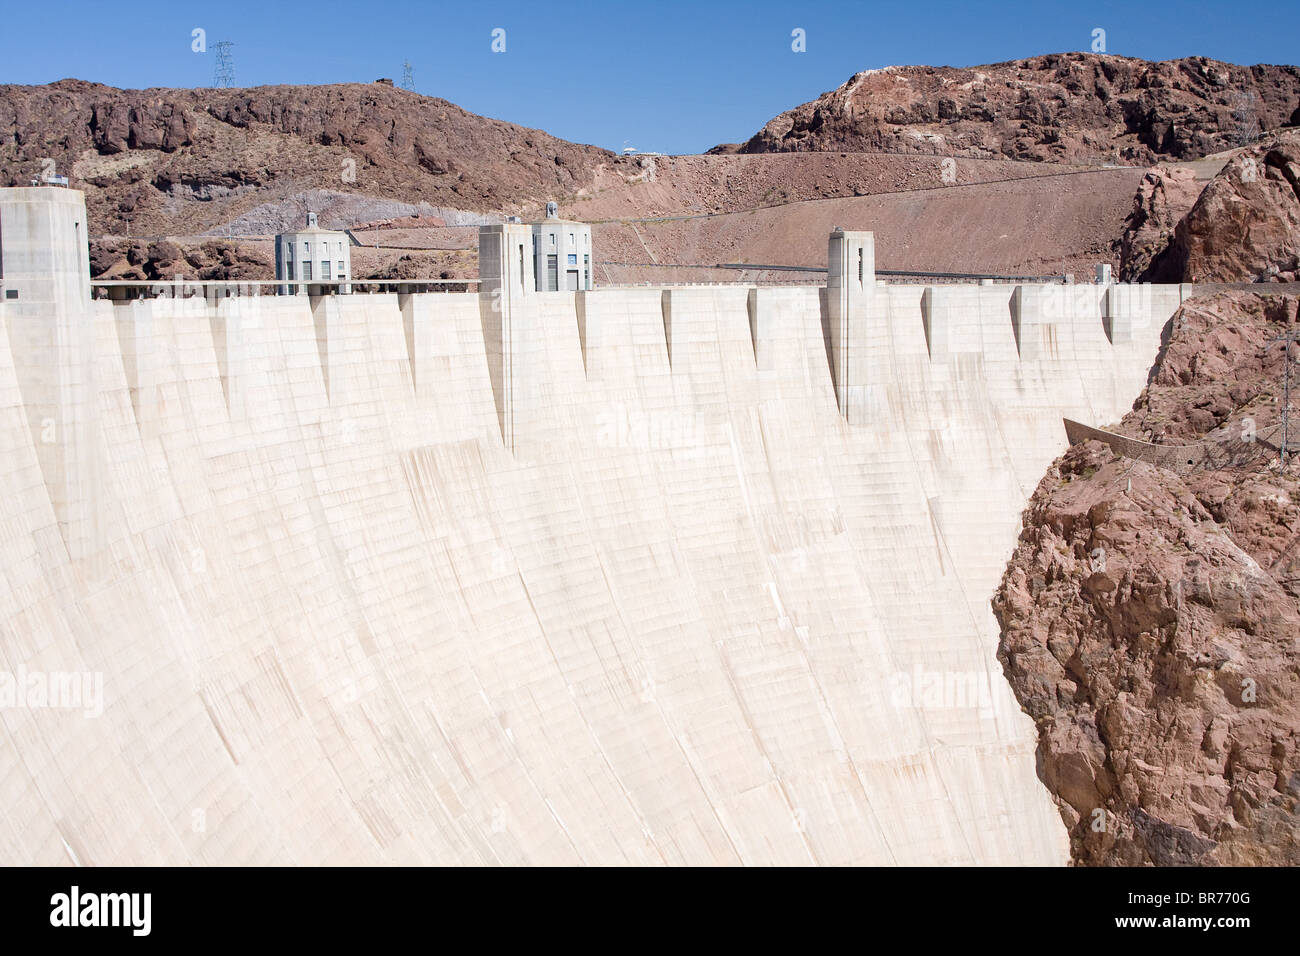 South side view of the hoover dam in Nevada/ Arizona, USA Stock Photo